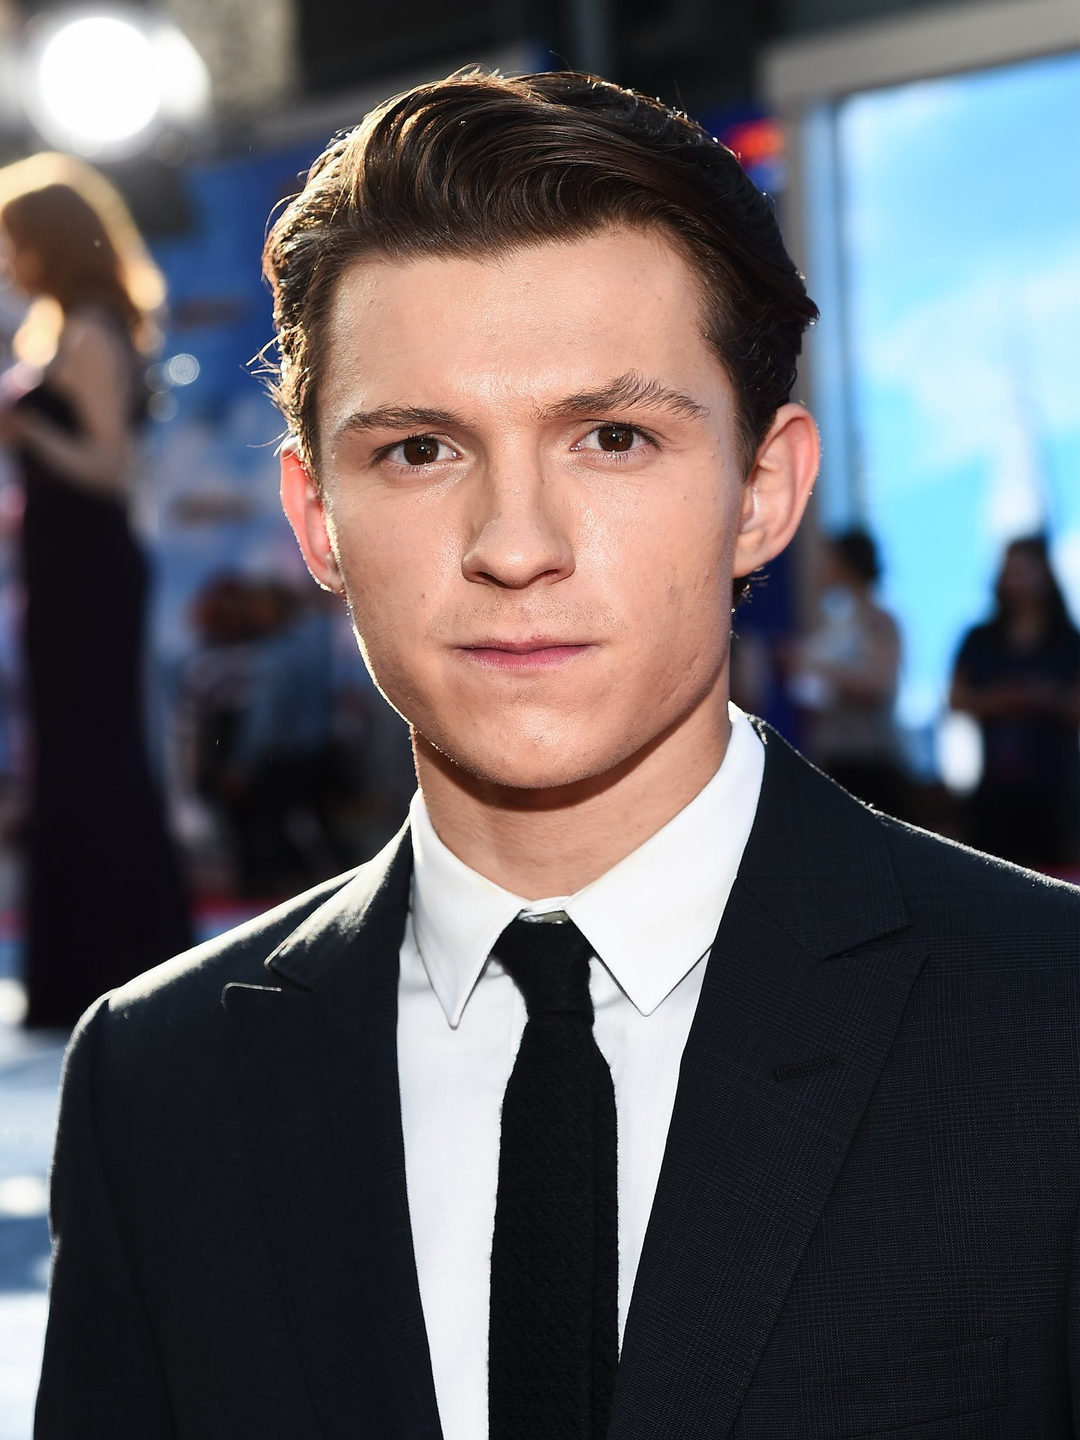 Tom Holland who are his parents